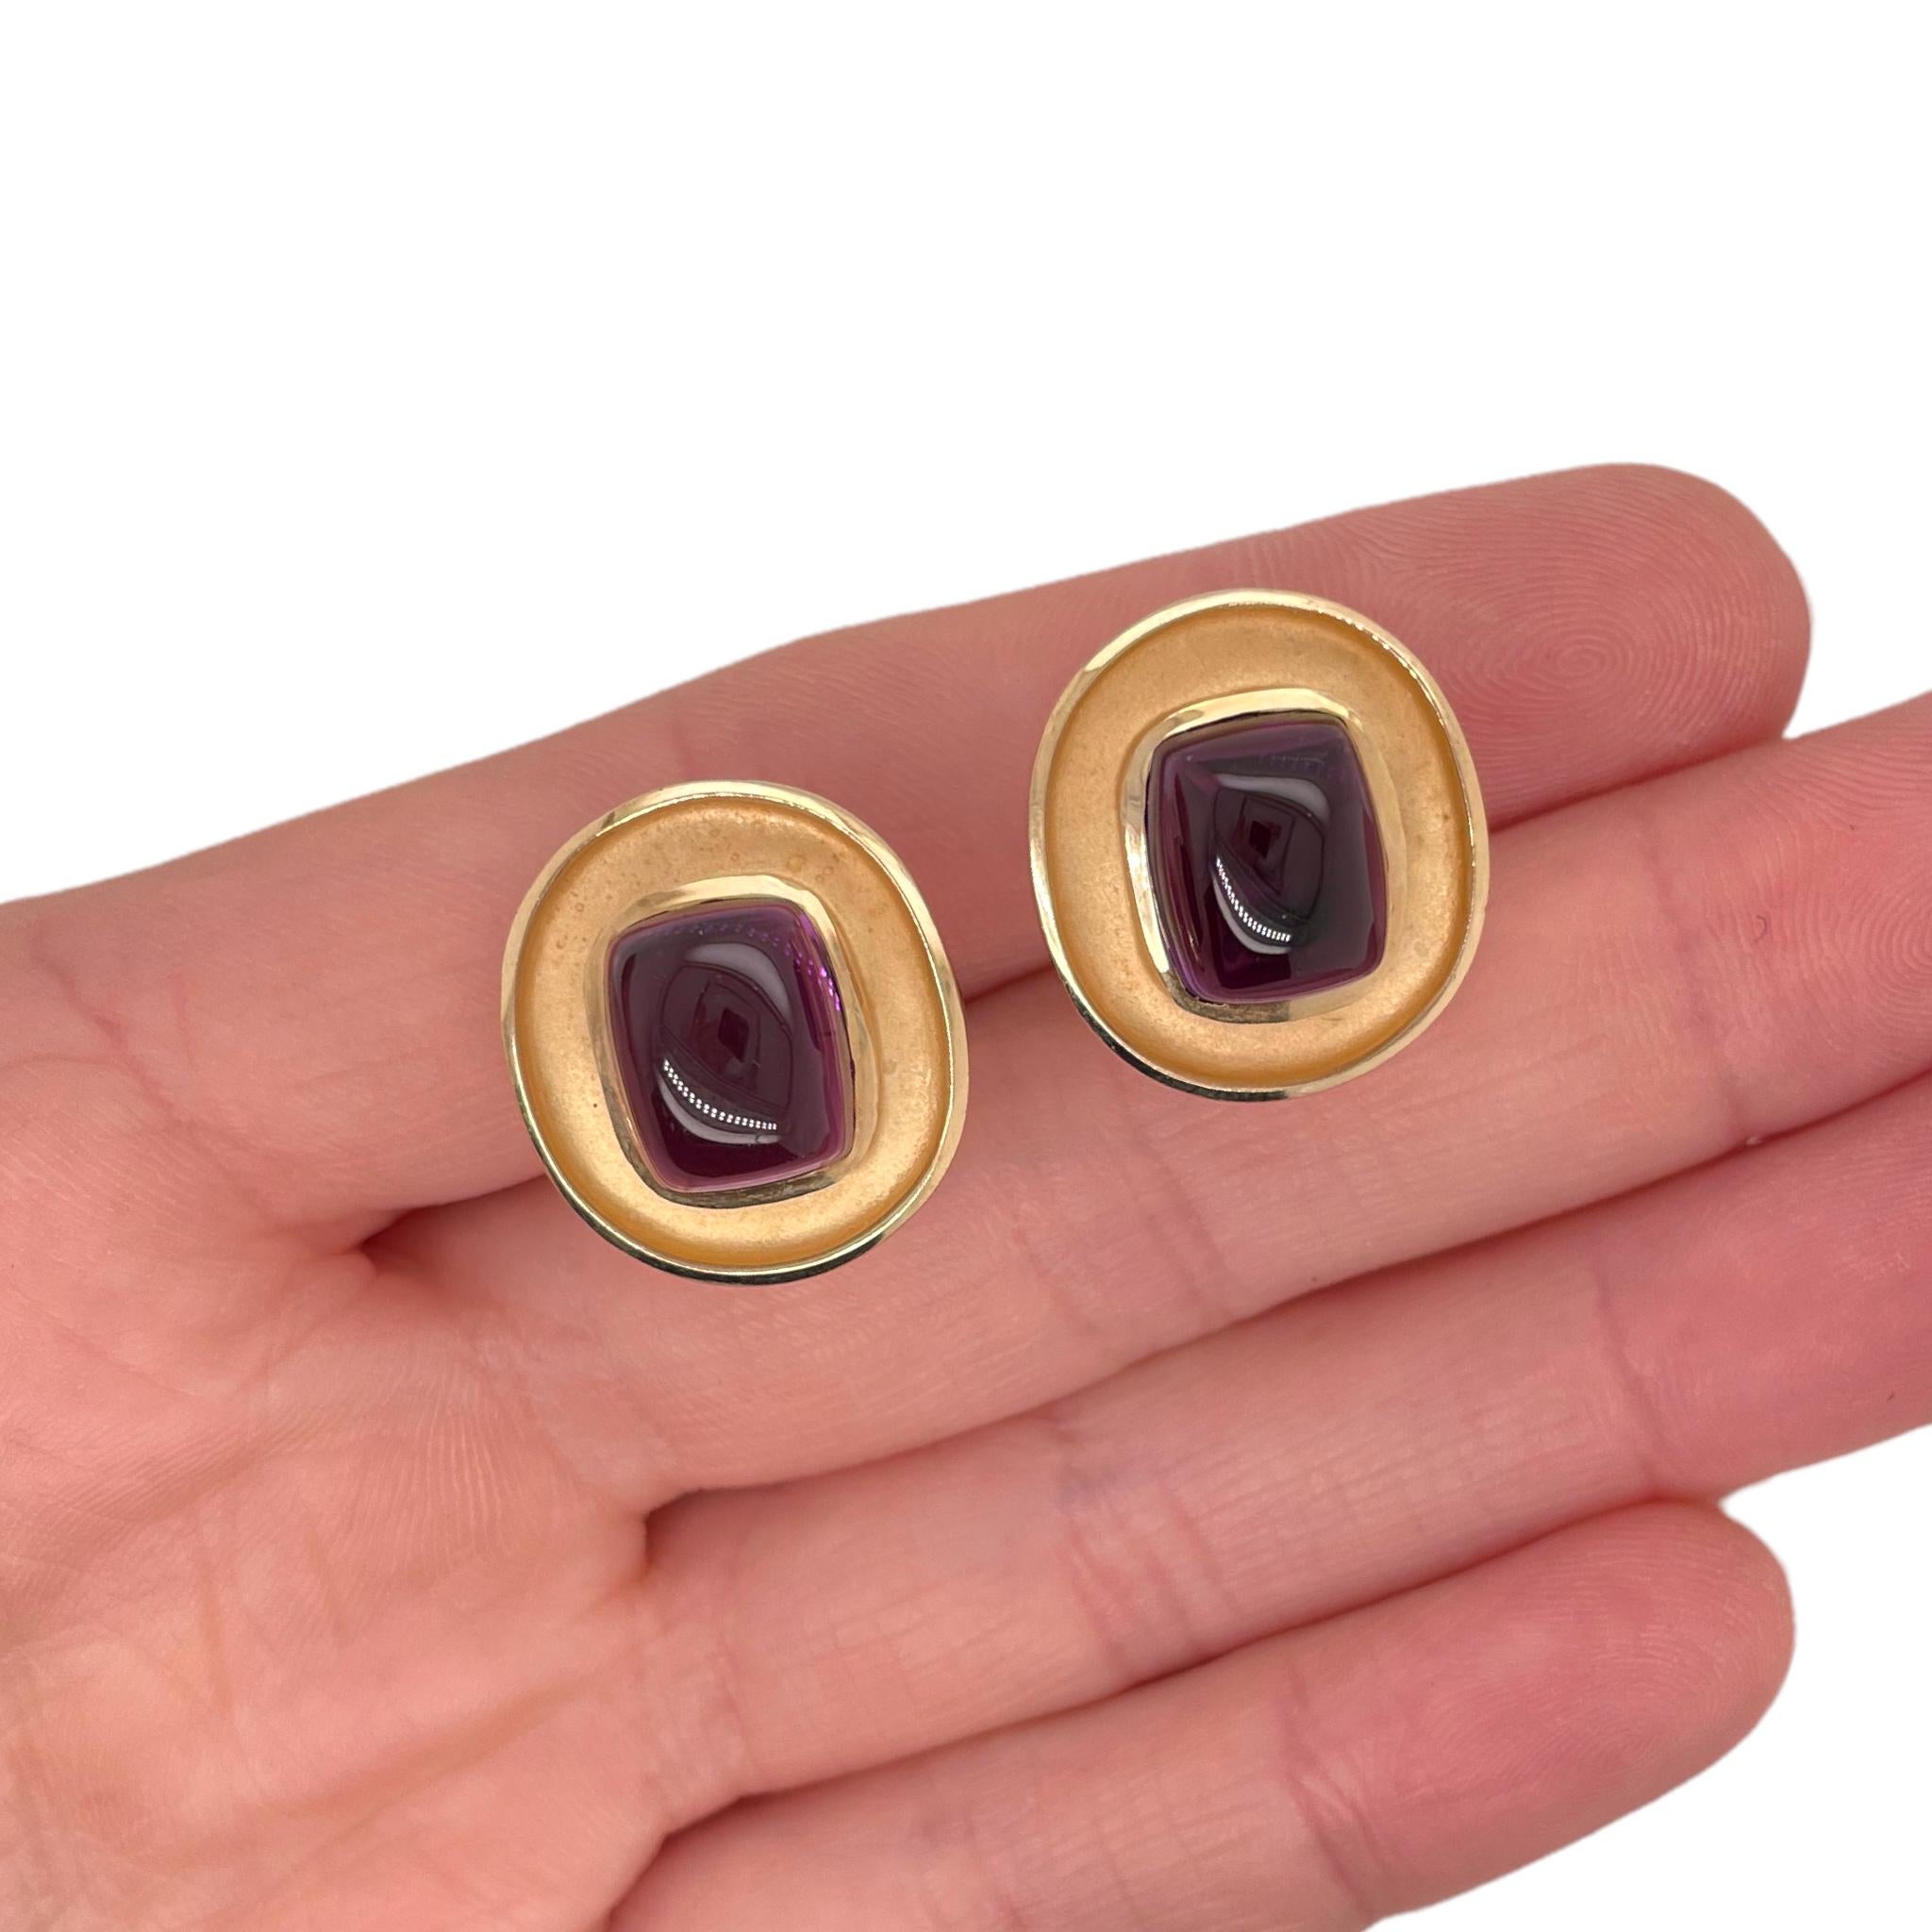 Amethyst clip earrings contain 2 finely matched square shape cabochon cut amethysts. 
Stones weigh approximately 5.00tcw and are set in bezel mountings. 
Earring weighs approximately 13.6grams and measure approximately 20x18mm.